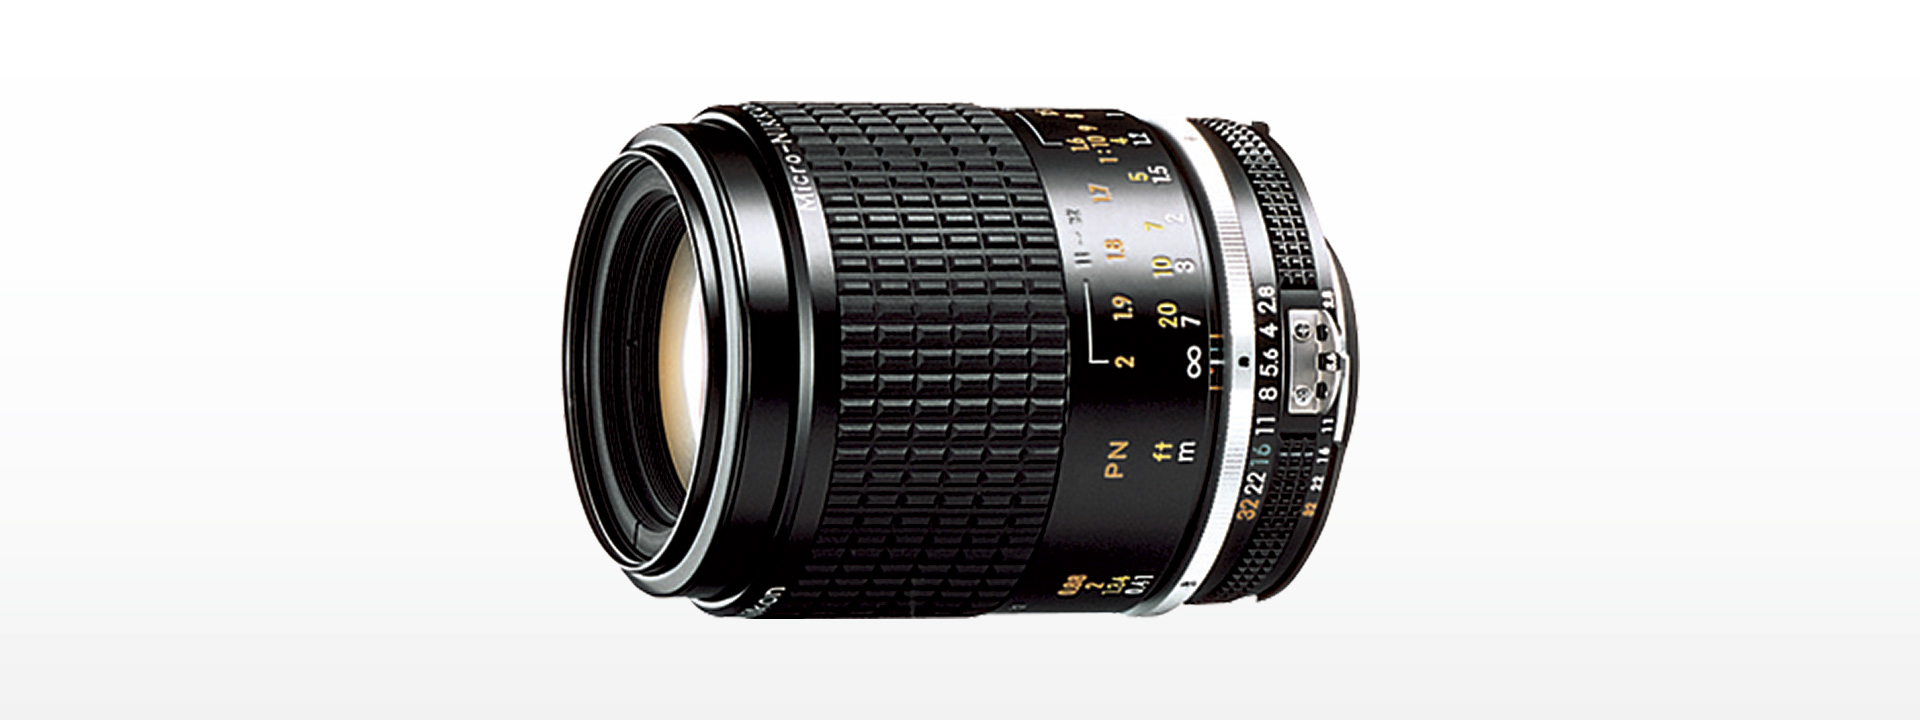 AI Micro-Nikkor 105mm f/2.8S